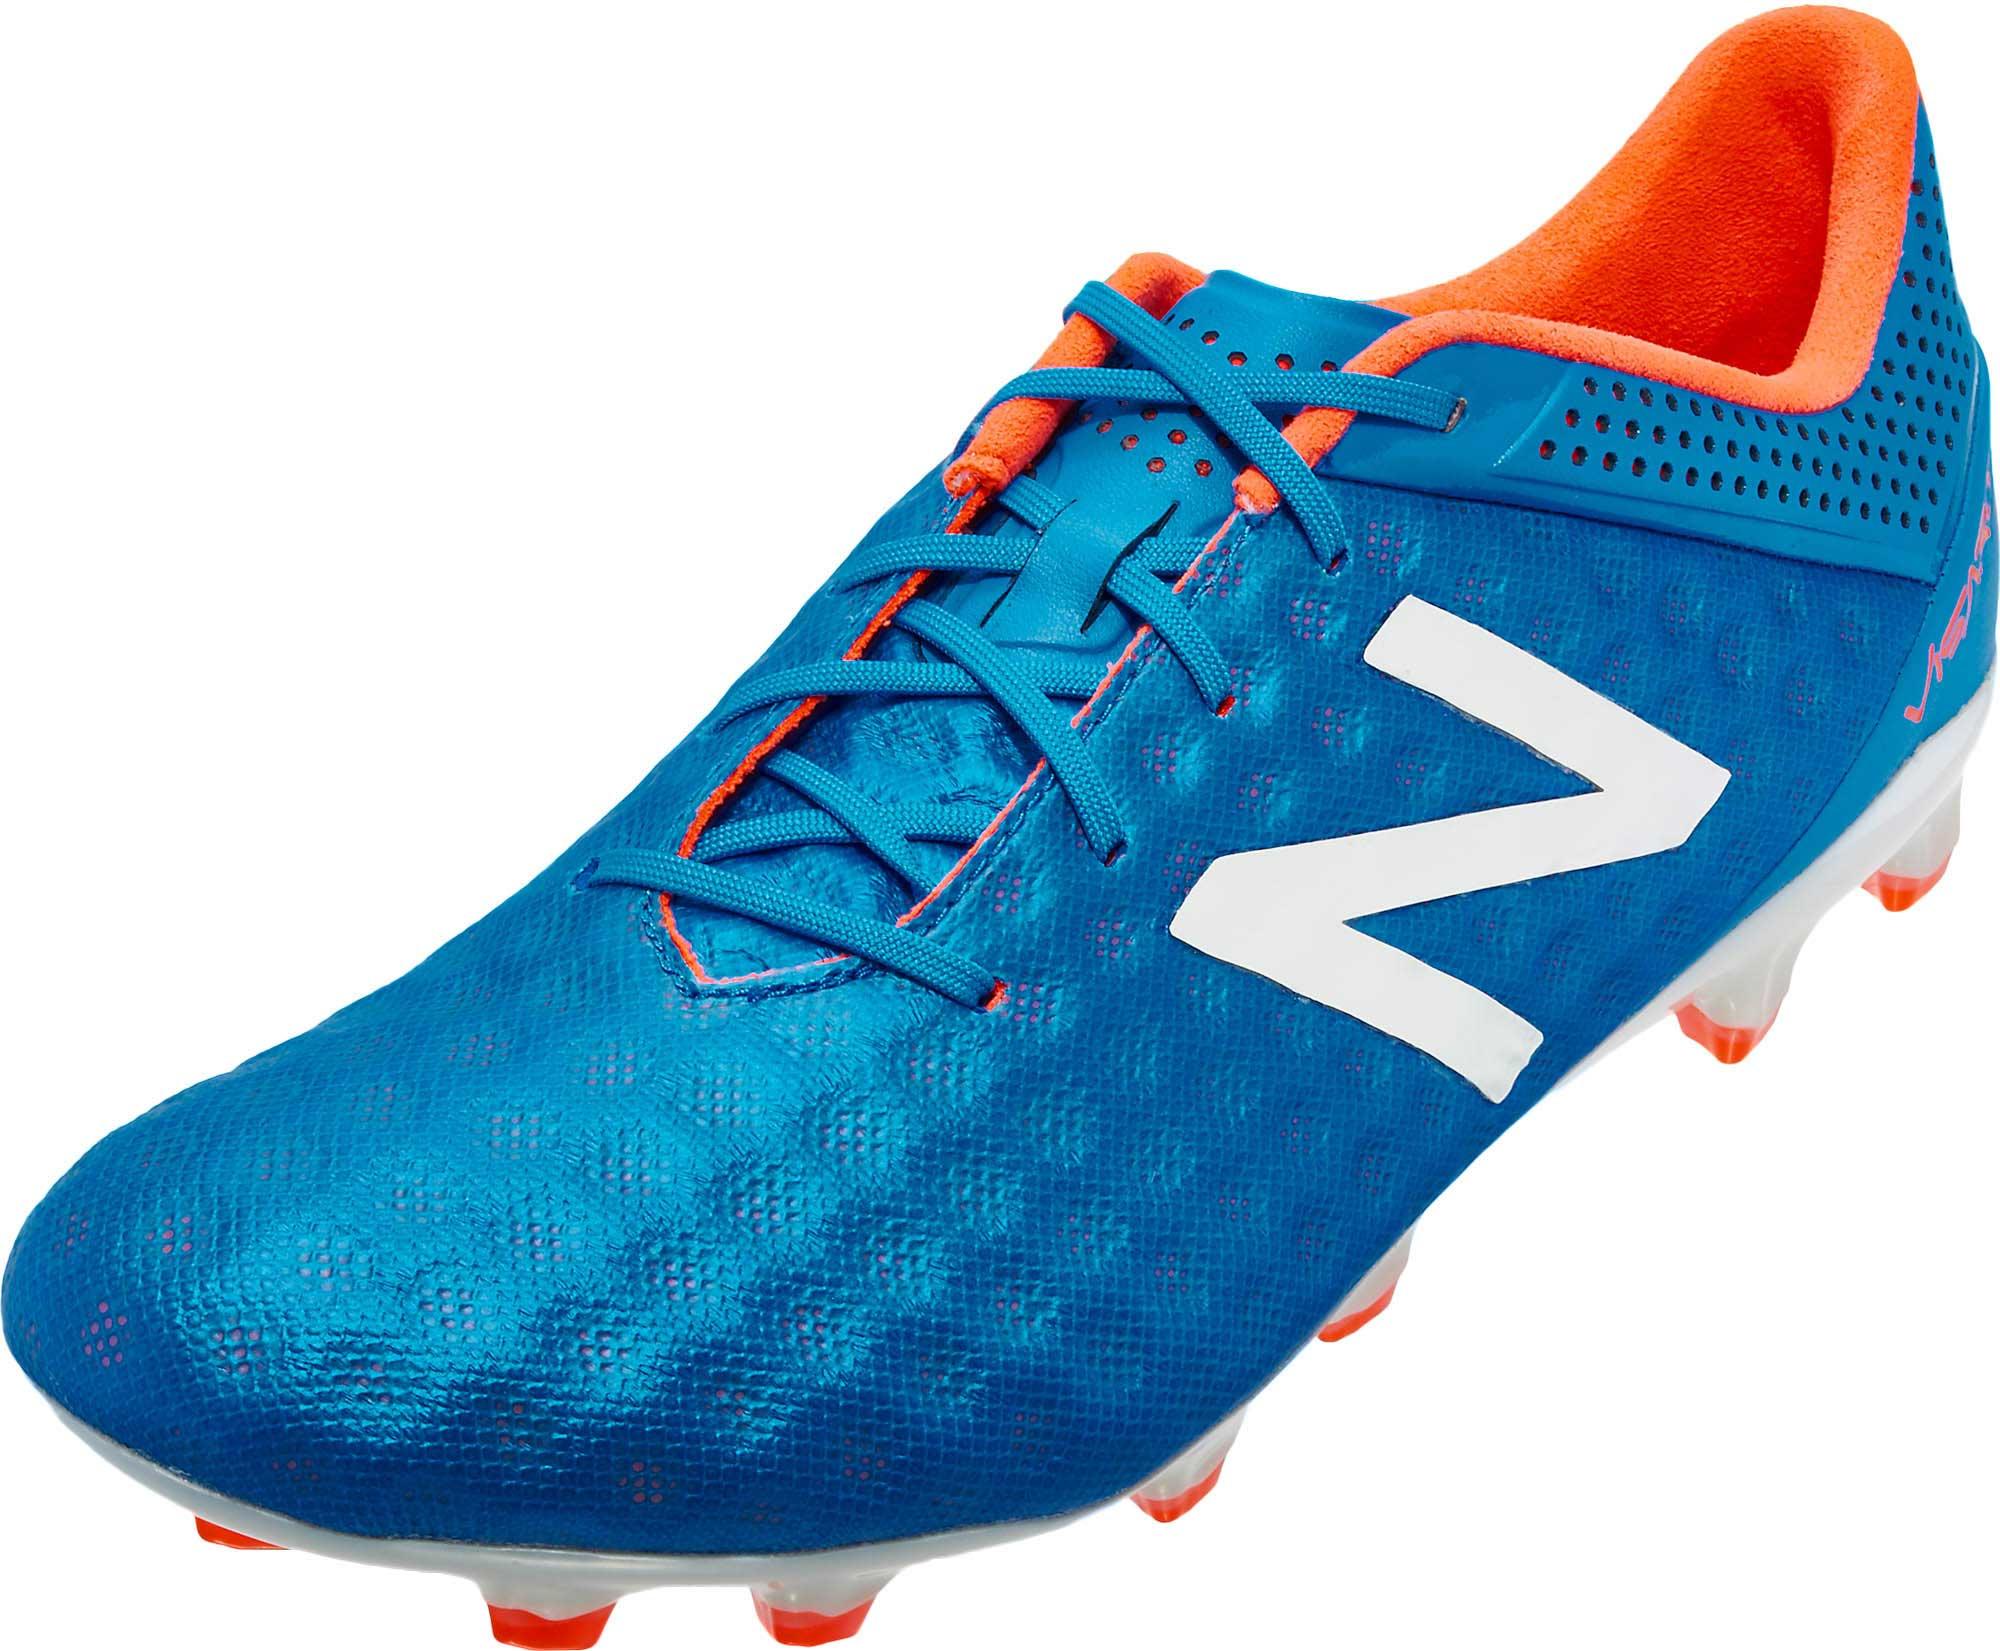 new balance wide cleats